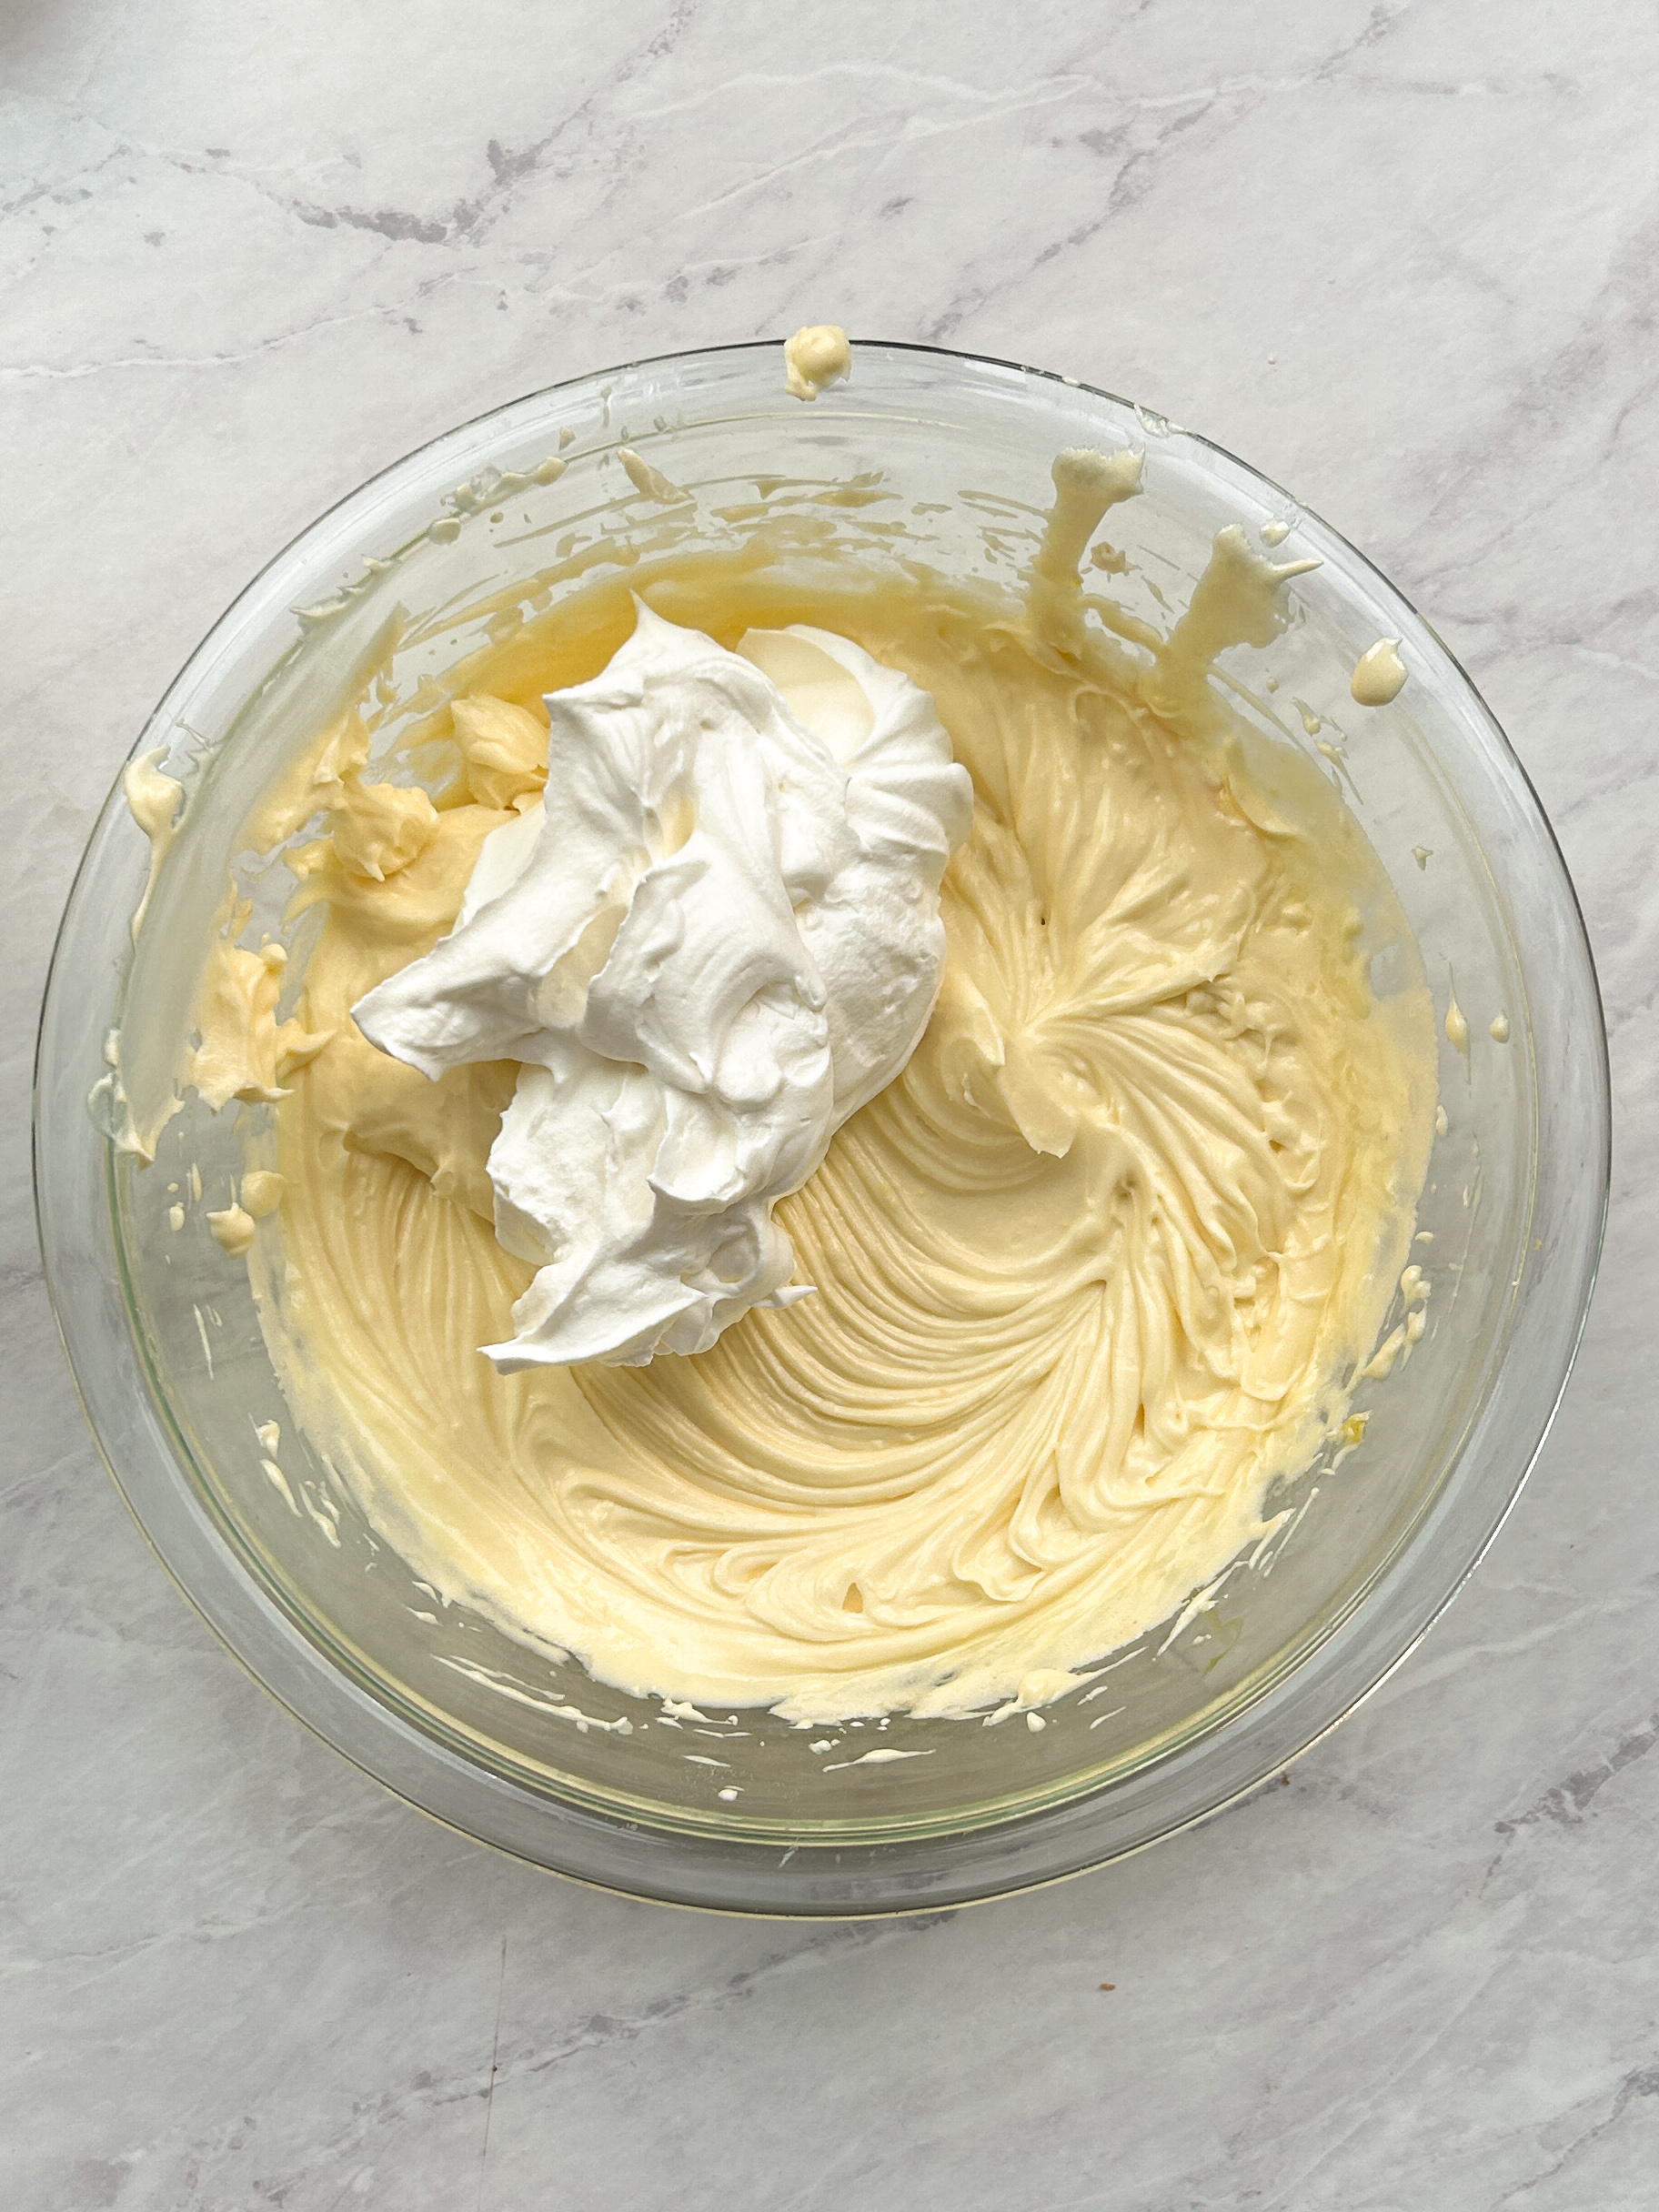 whipped cream added on top of mascarpone and eggs in a bowl